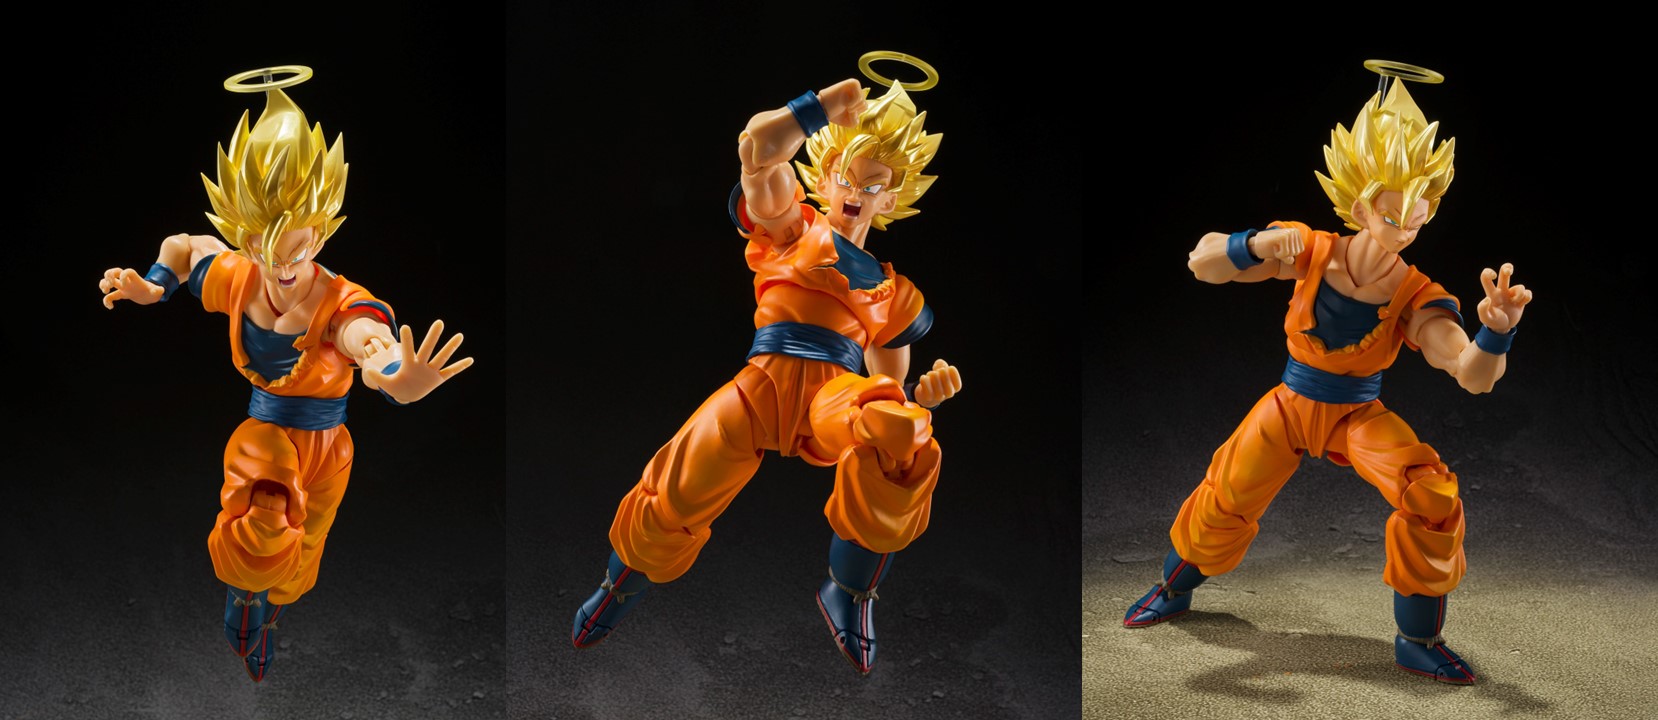 Details about   【50variations】Bandai Tamashii Nations S.H Figuarts Action Figure Dragon ball Z 